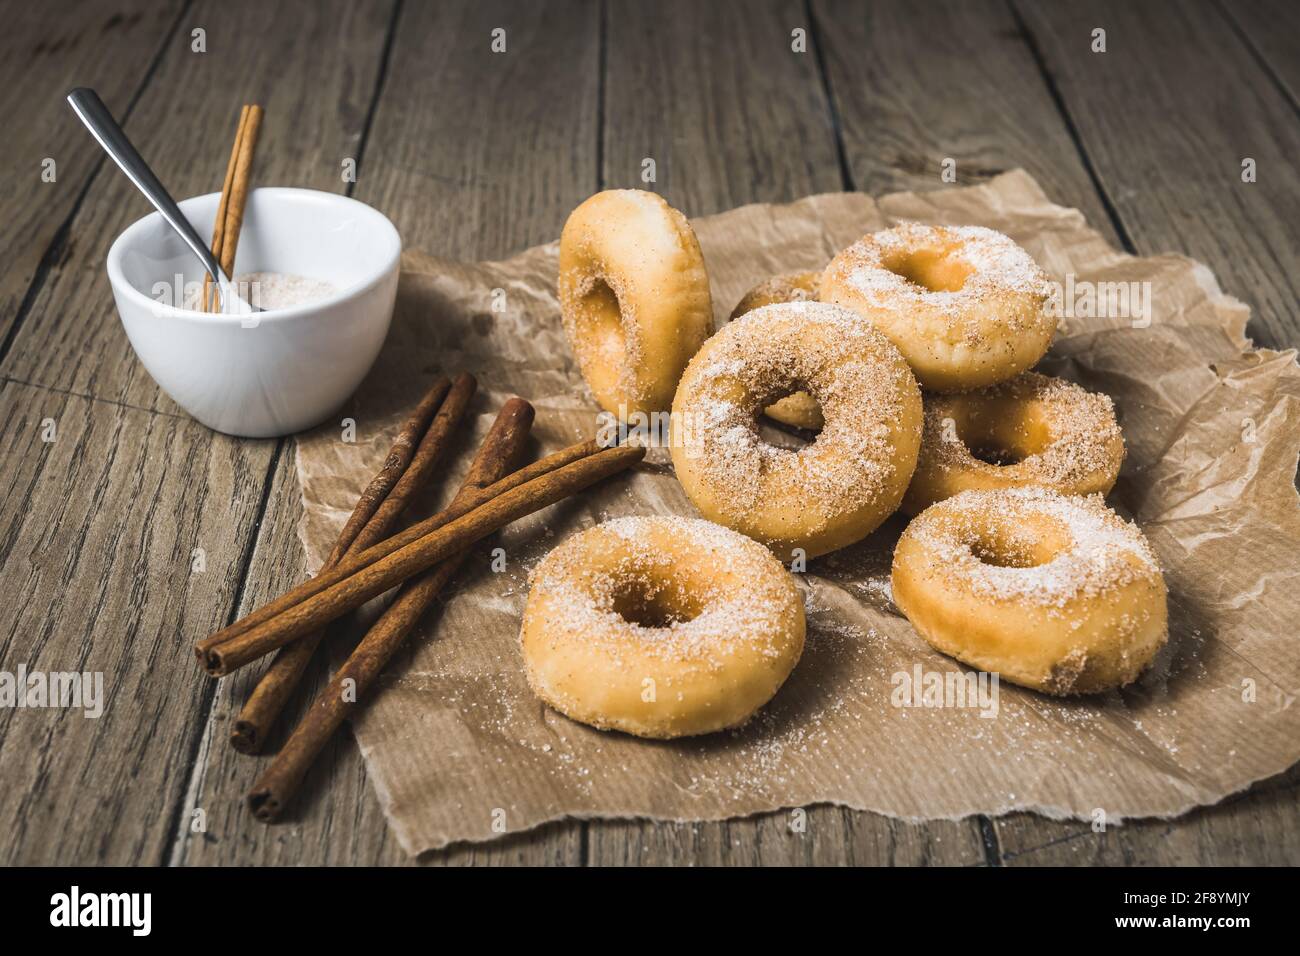 Mini donuts with sugar and cinnamon on a paper on a wooden table Stock Photo